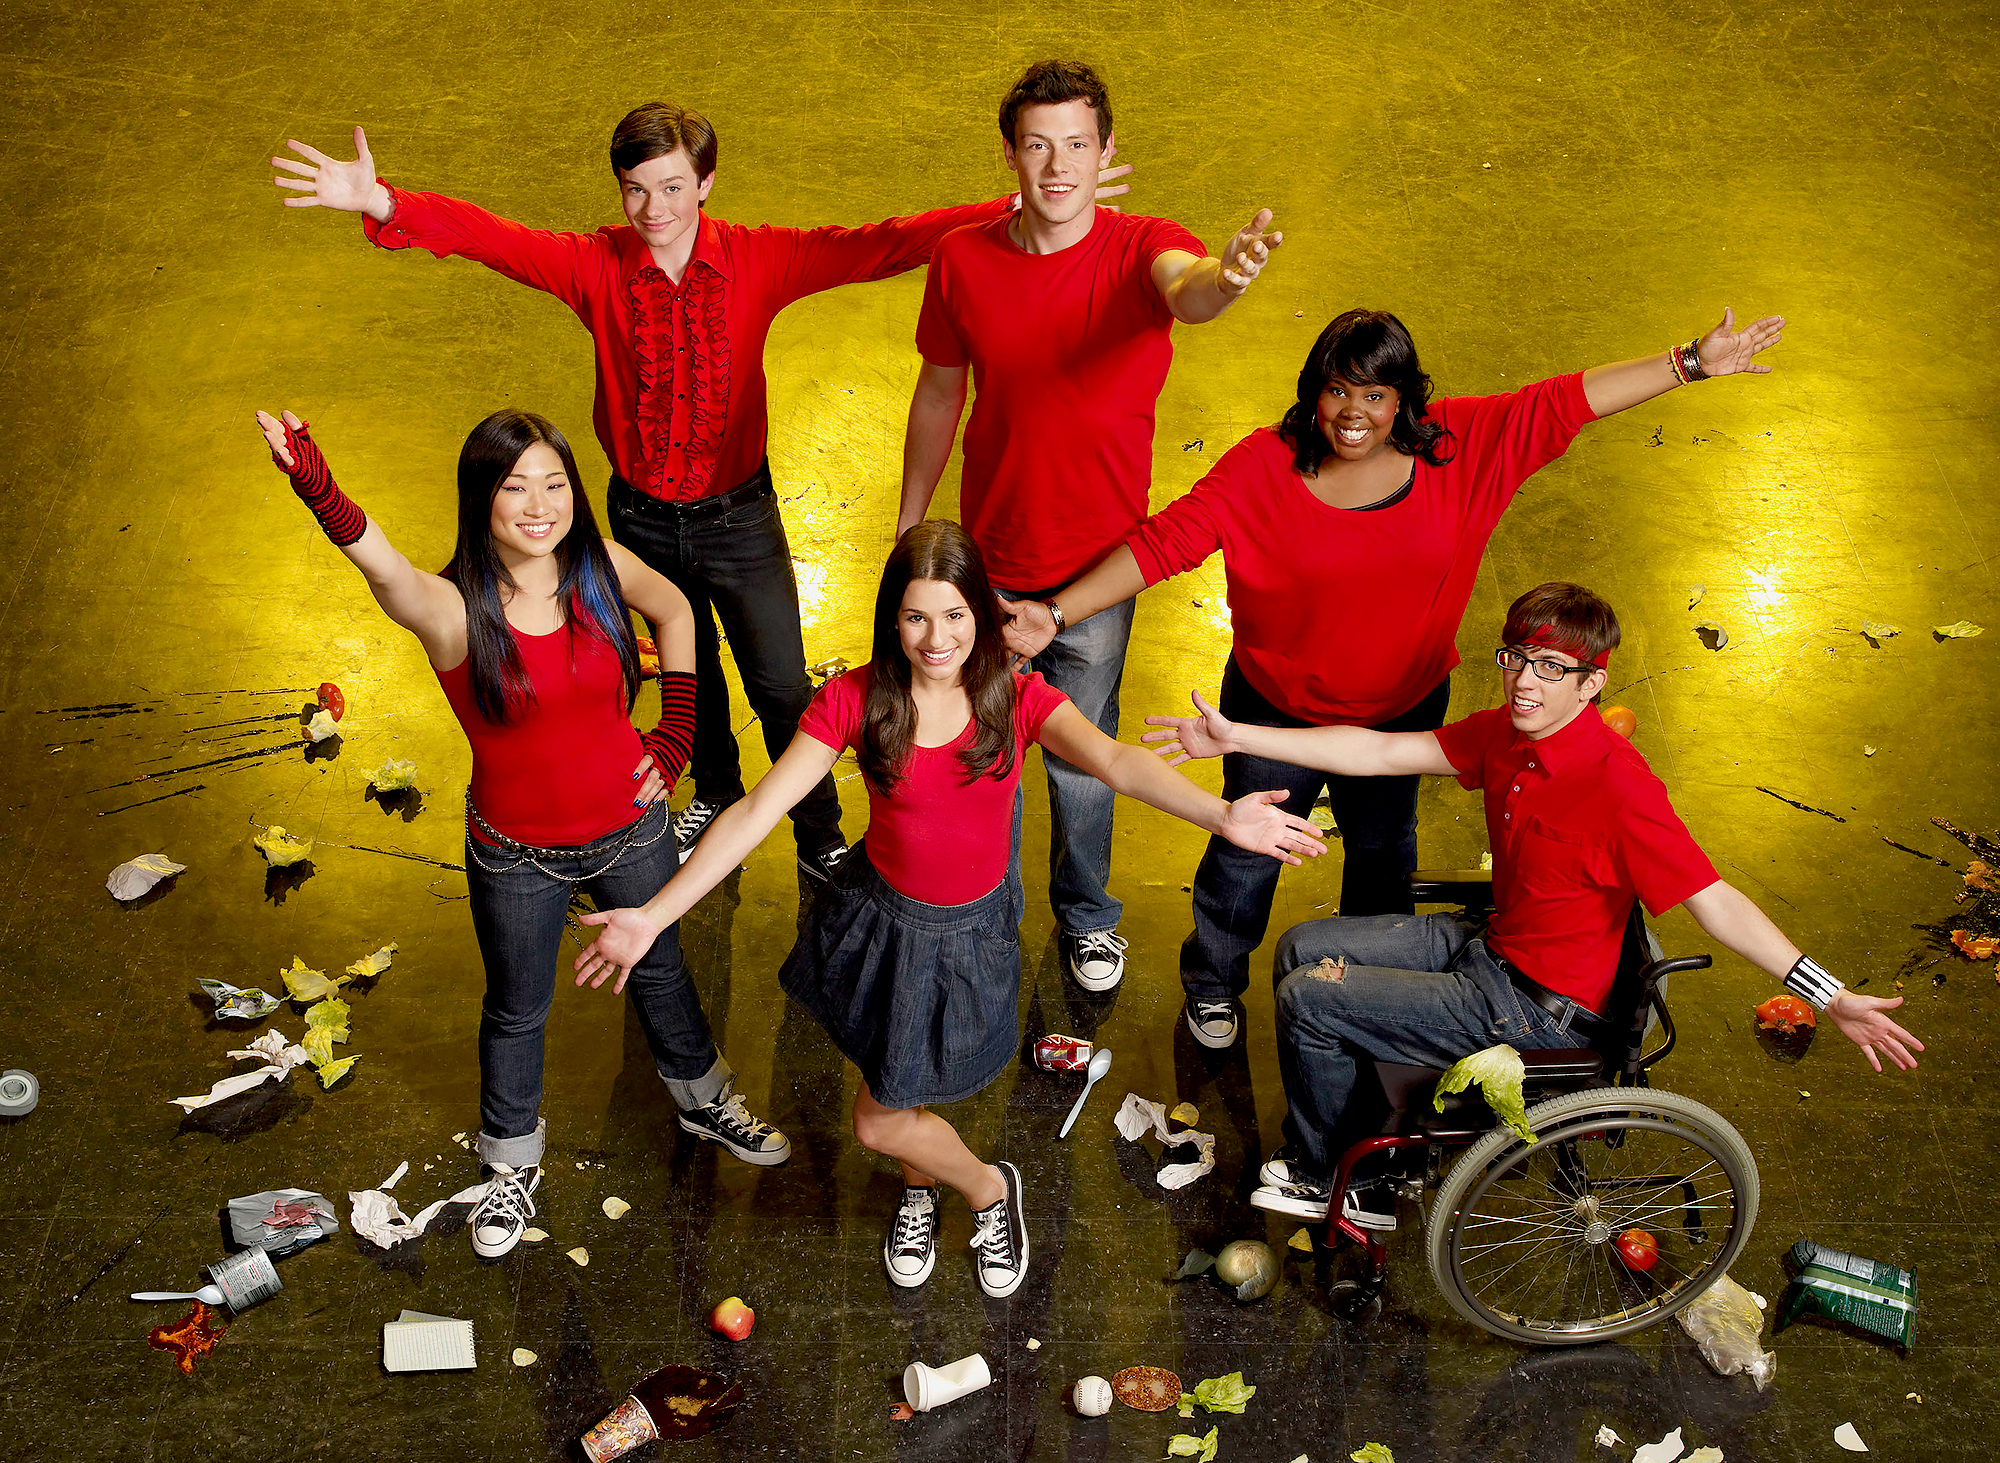 Married in on glee life real who is Glee: 5